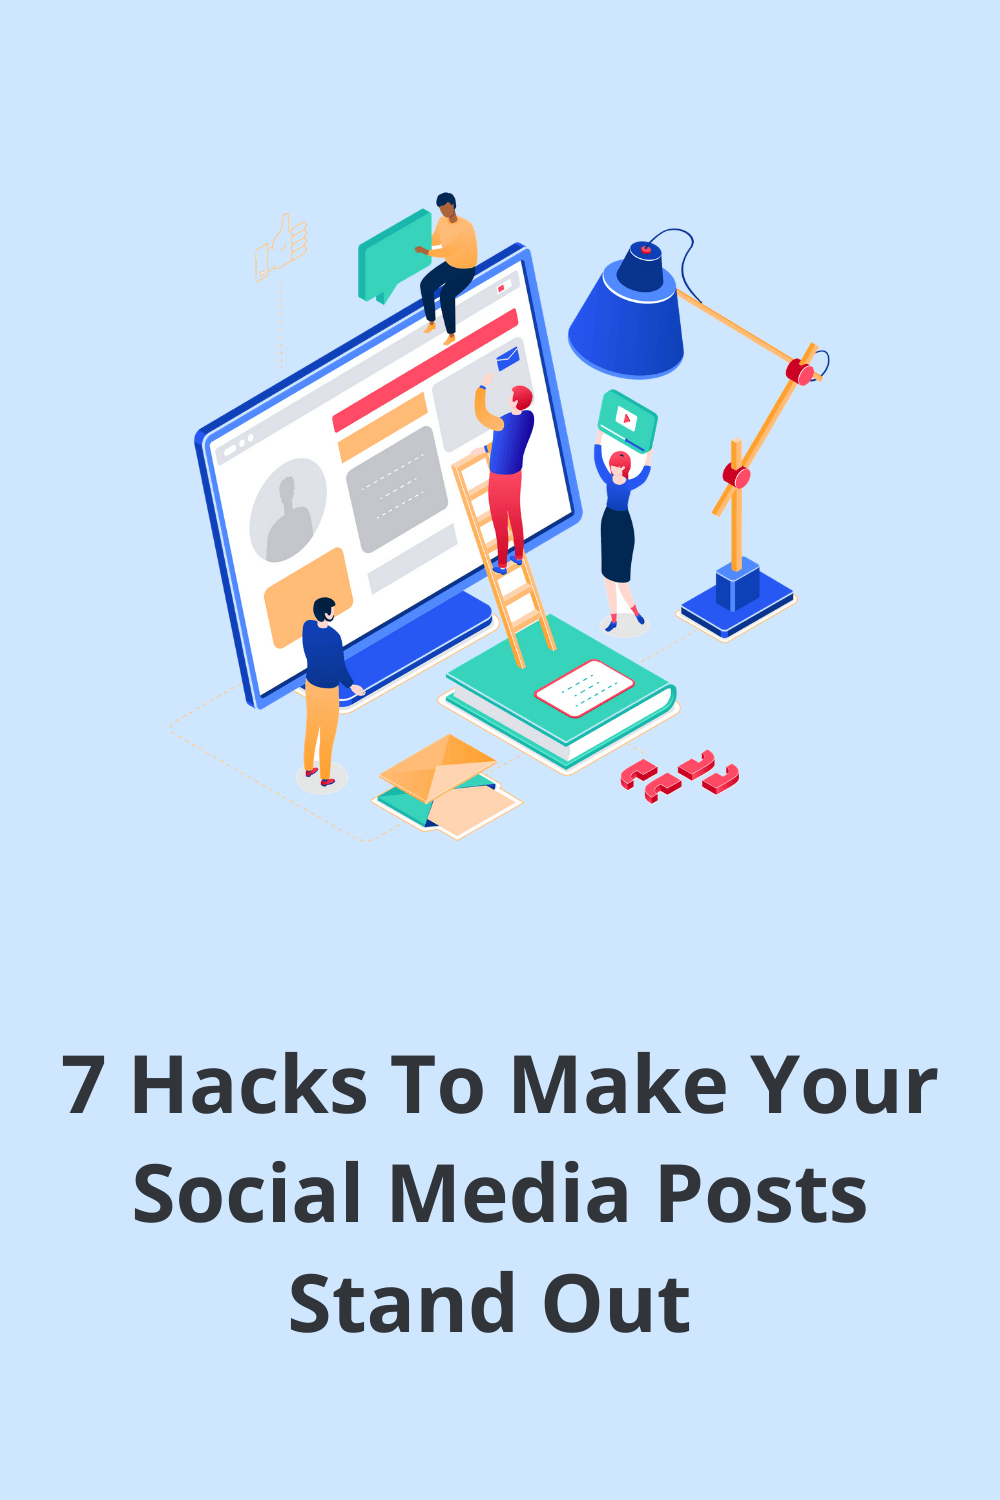 Need a way to break through the chaos on social media? Make your post stand out with these 7 hacks to make your social media posts stand out! via @scopedesign